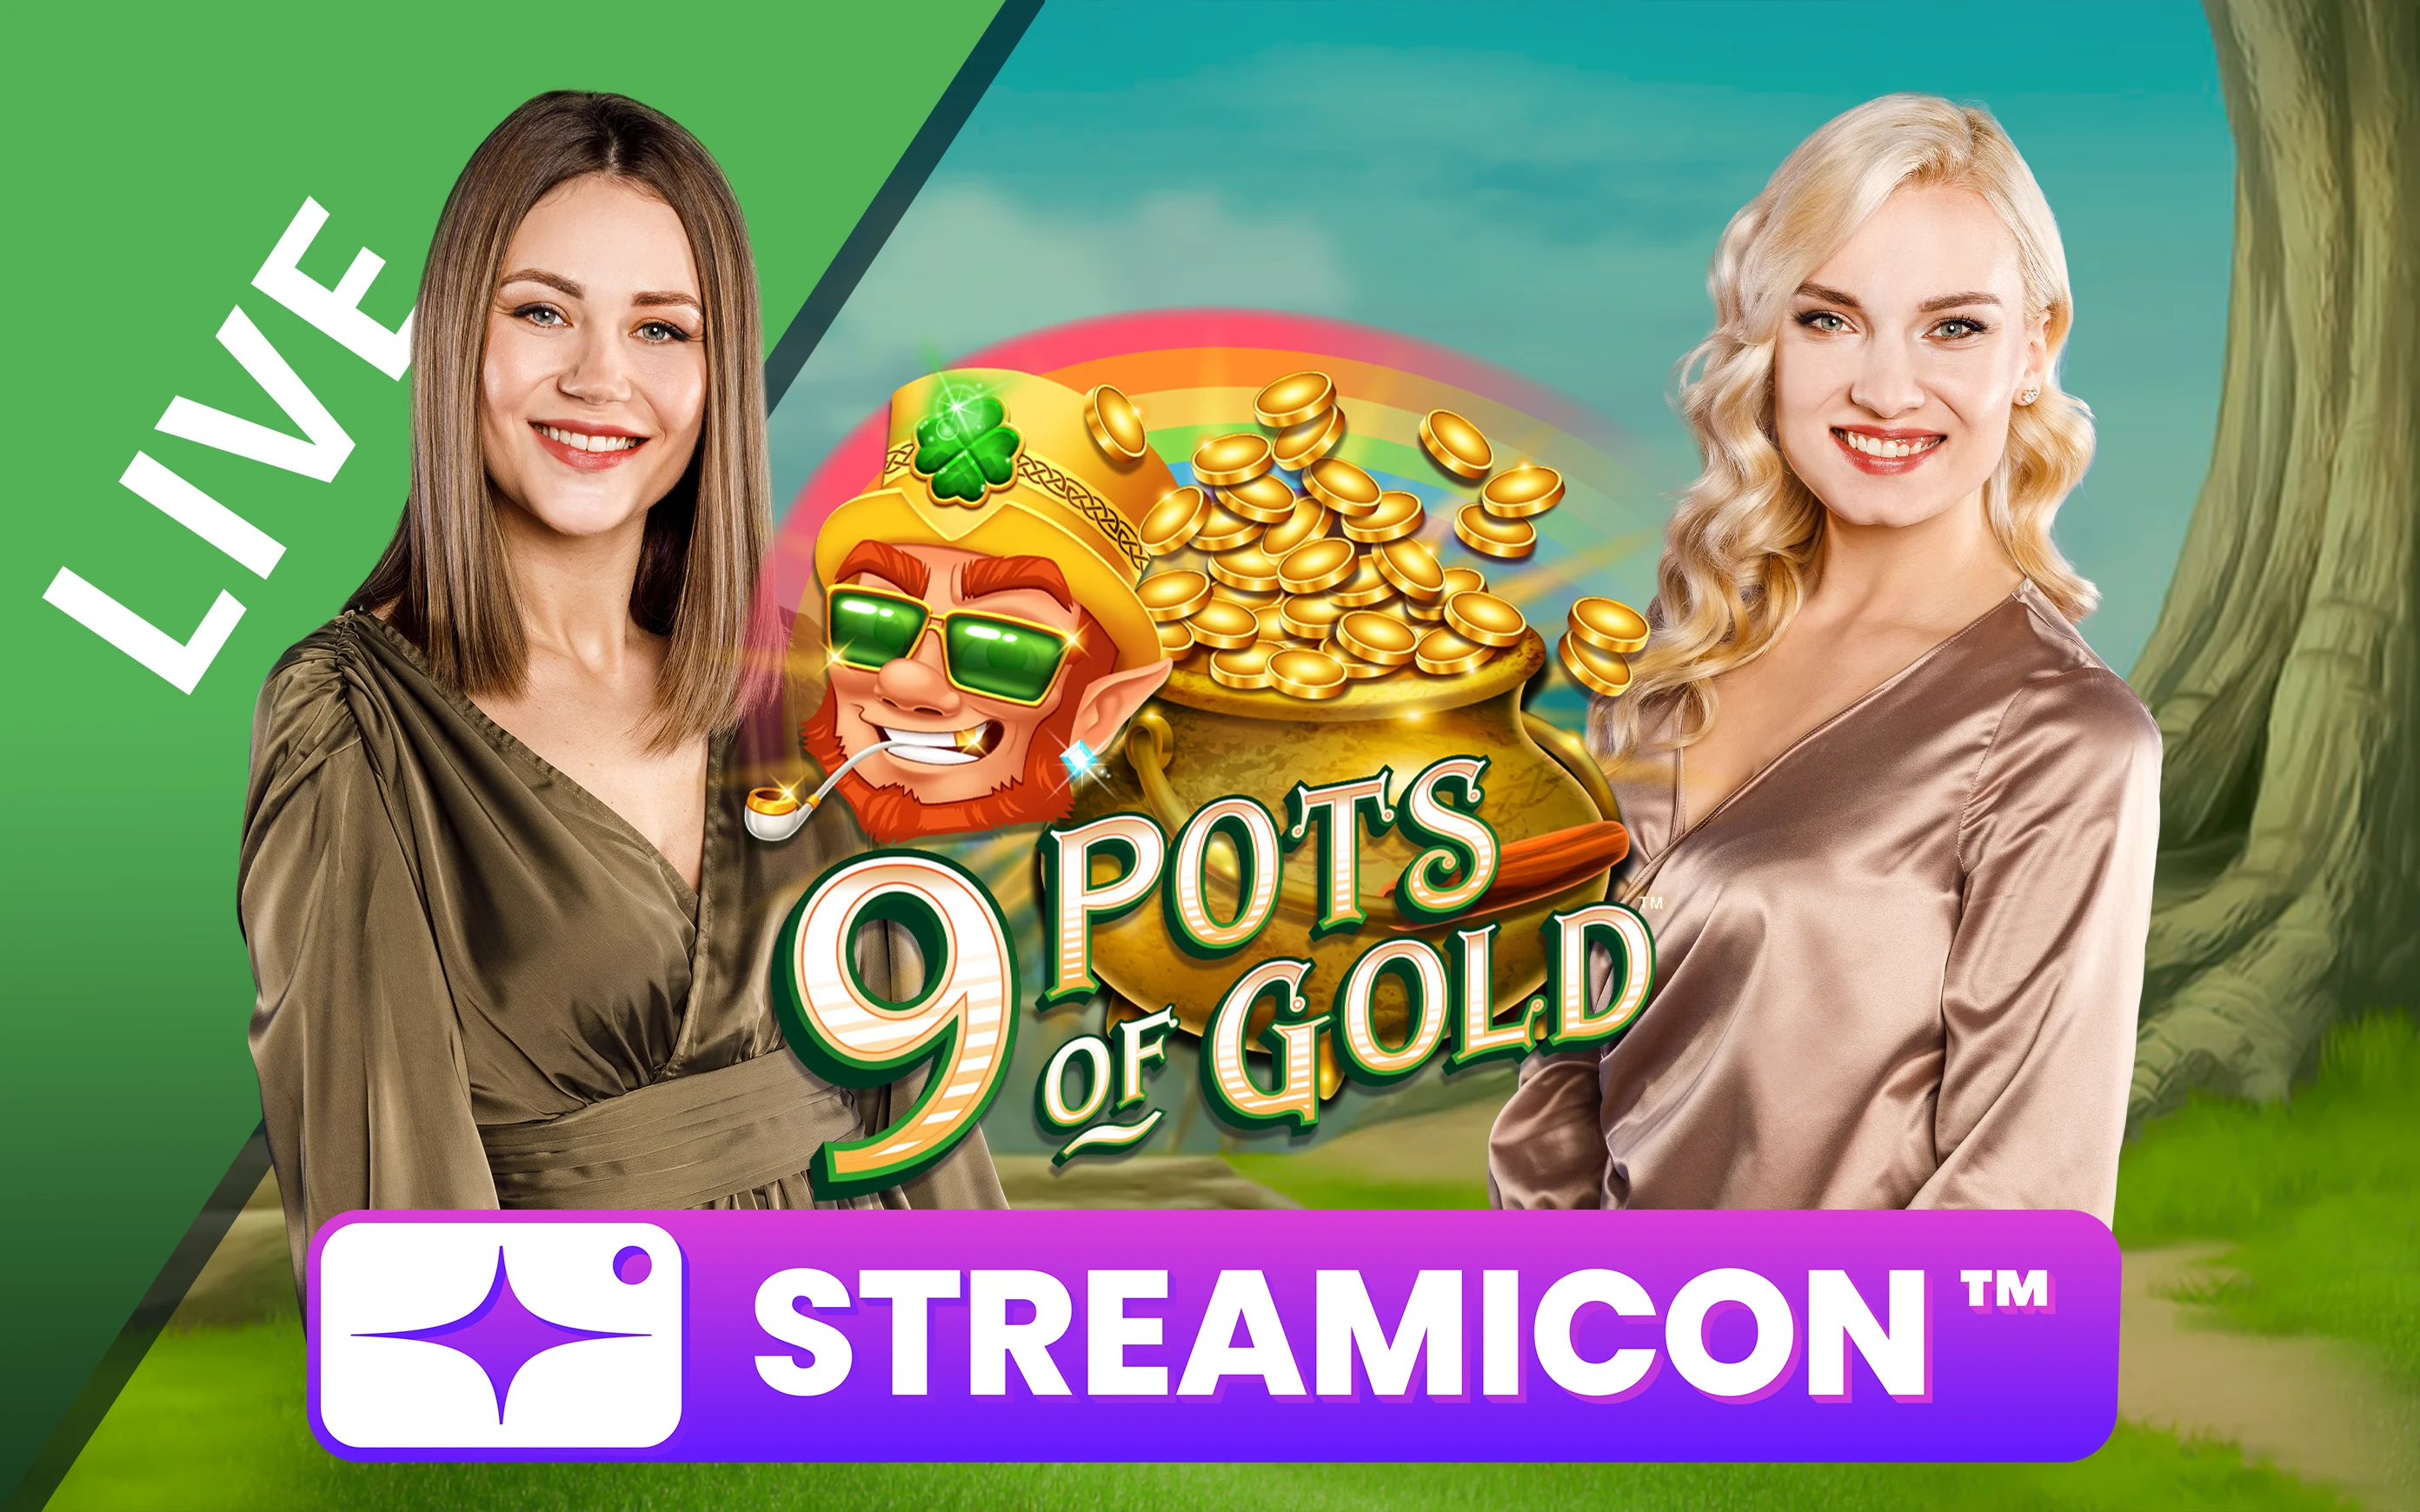 Play 9 Pots of Gold™ Streamicon™ on Starcasino.be online casino